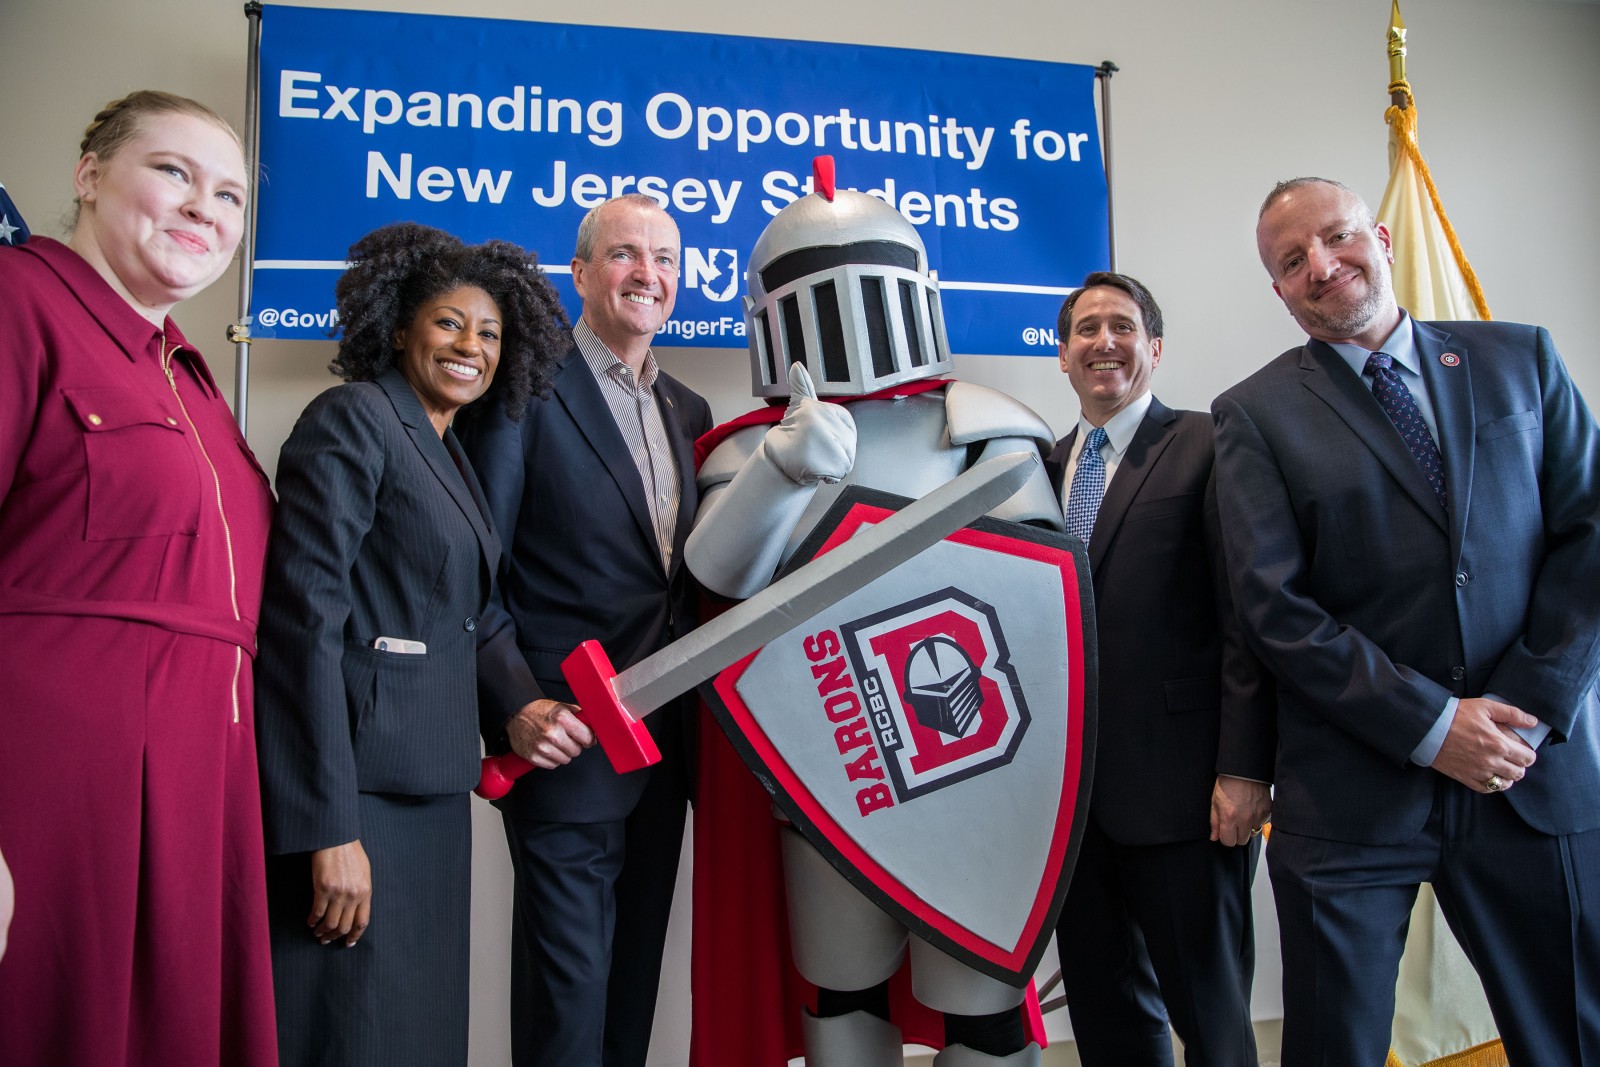 Governor Murphy, Barry, and Dr. Cioce with student and community member